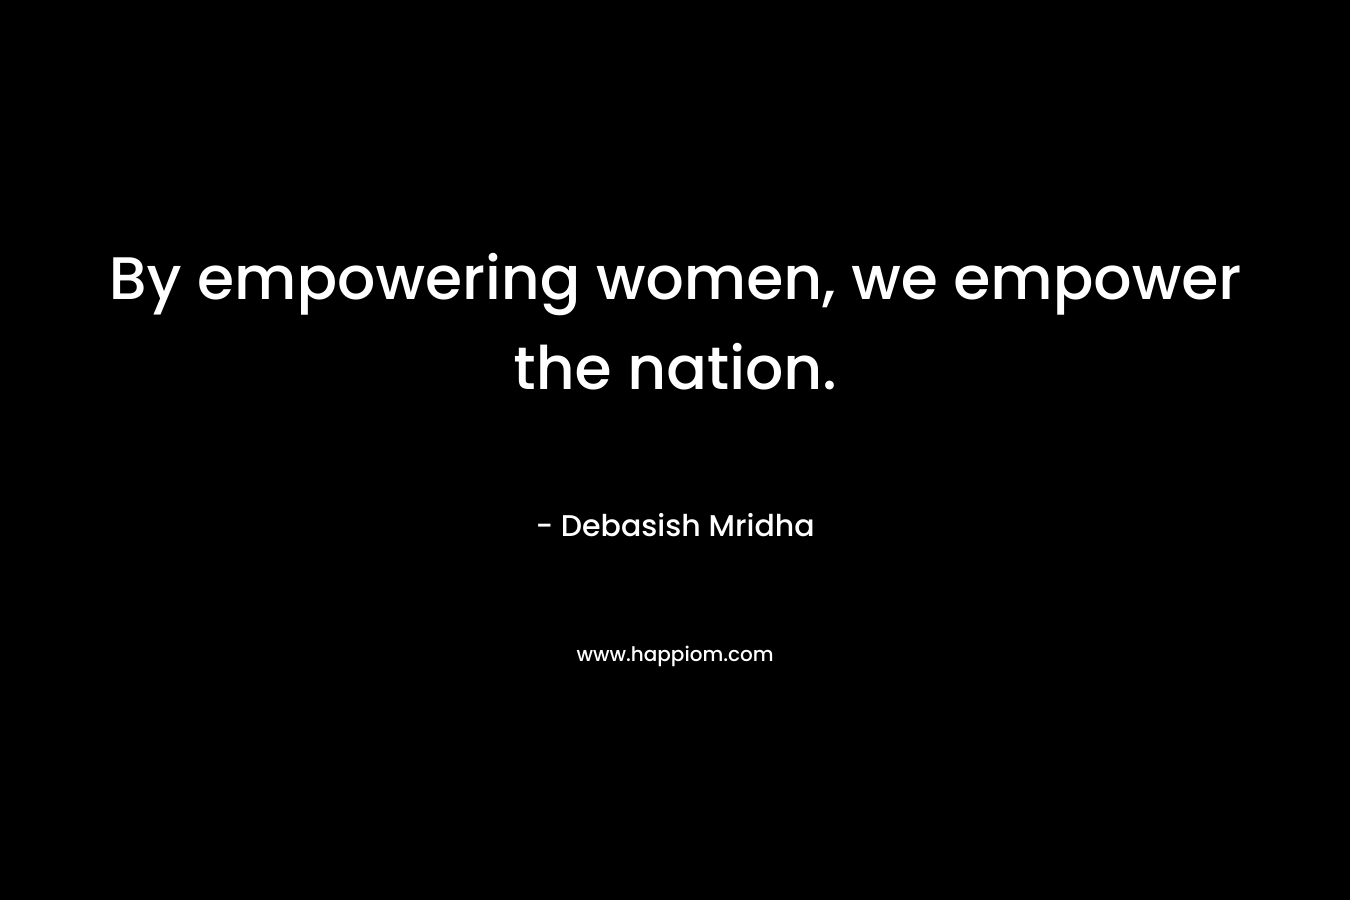 By empowering women, we empower the nation.